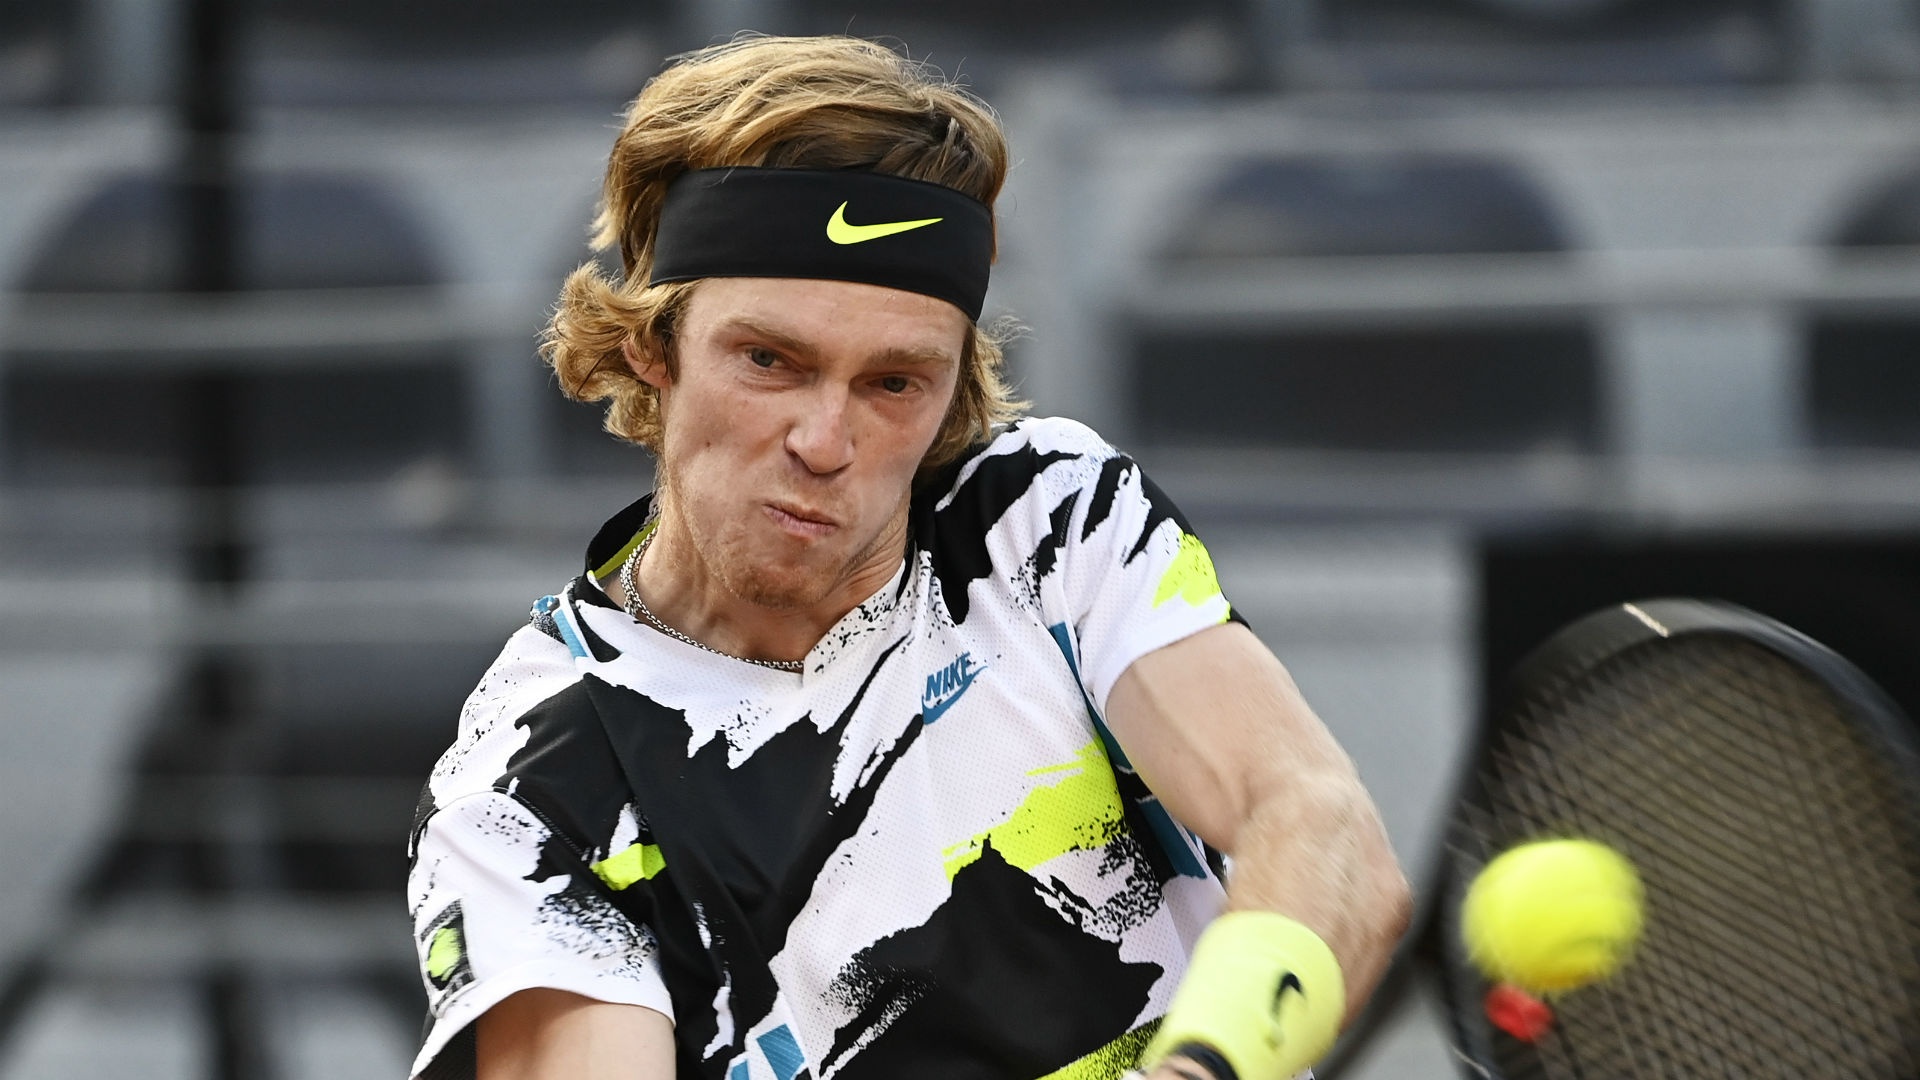 Andrey Rublev - Rome '20